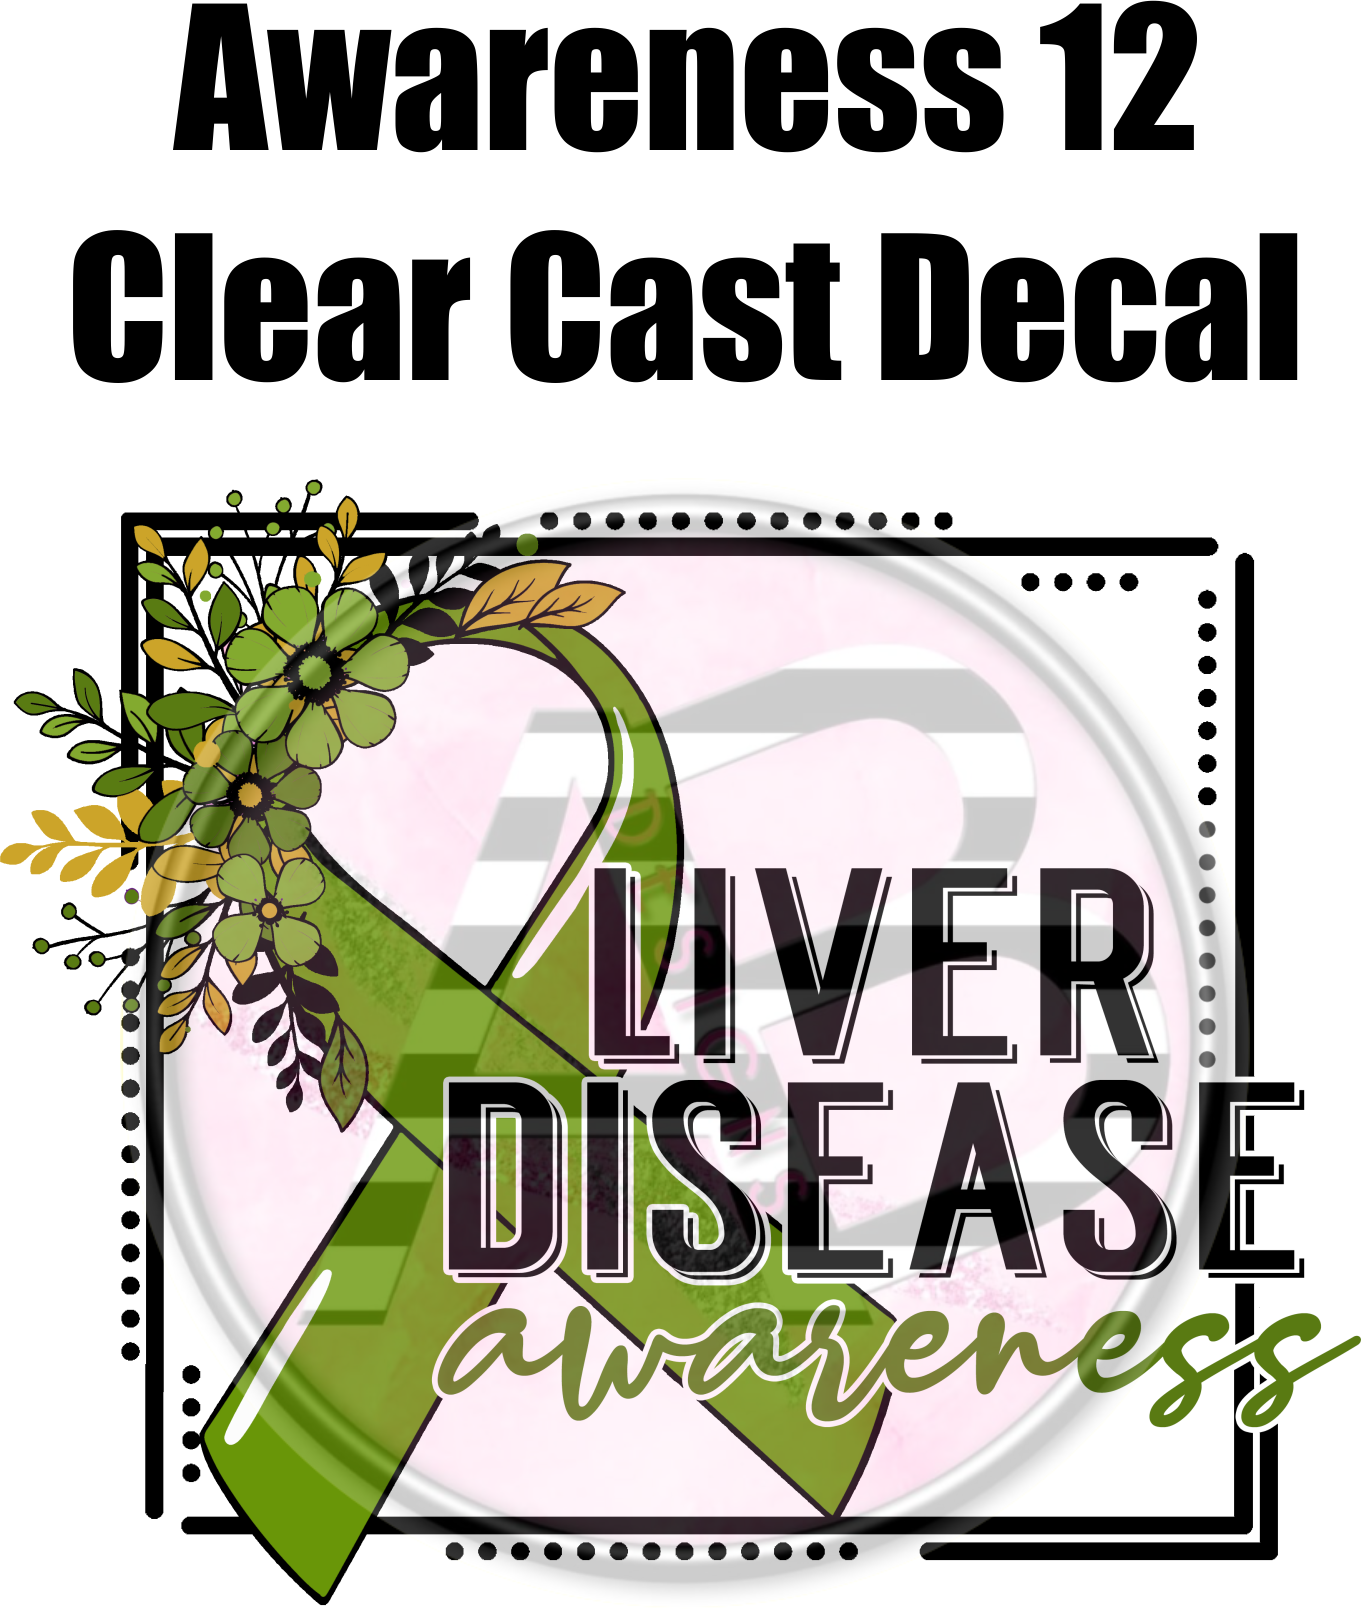 Awareness 12 - Clear Cast Decal - 92